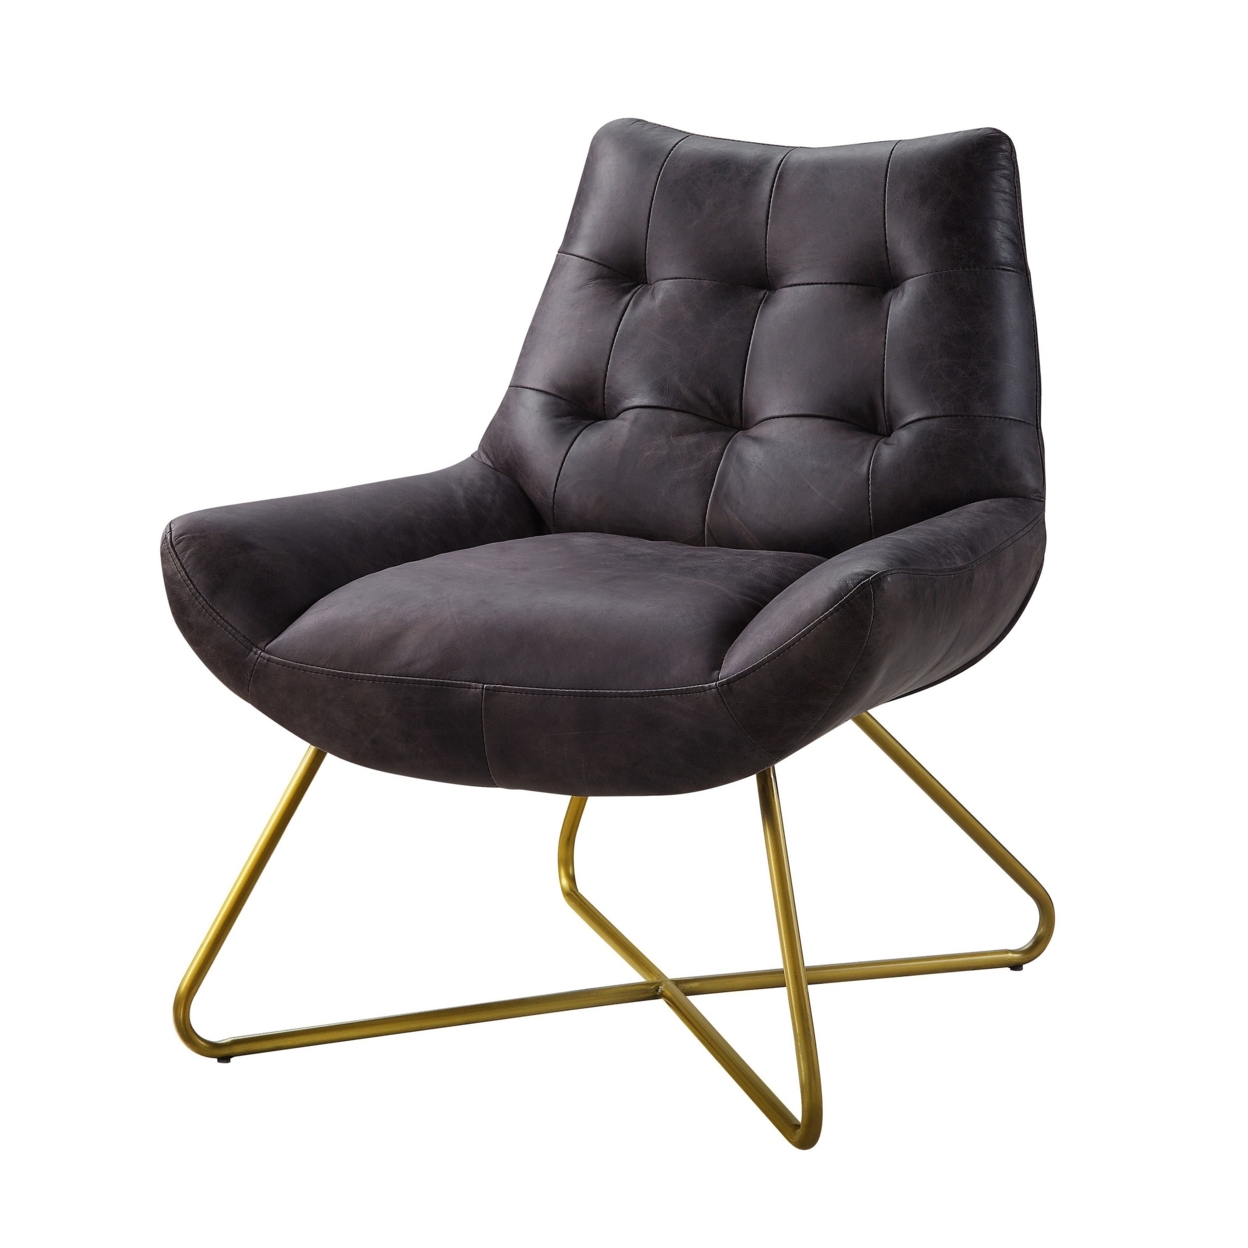 Leatherette Accent Chair With Tufted Backrest And Metal Base,Black And Gold- Saltoro Sherpi